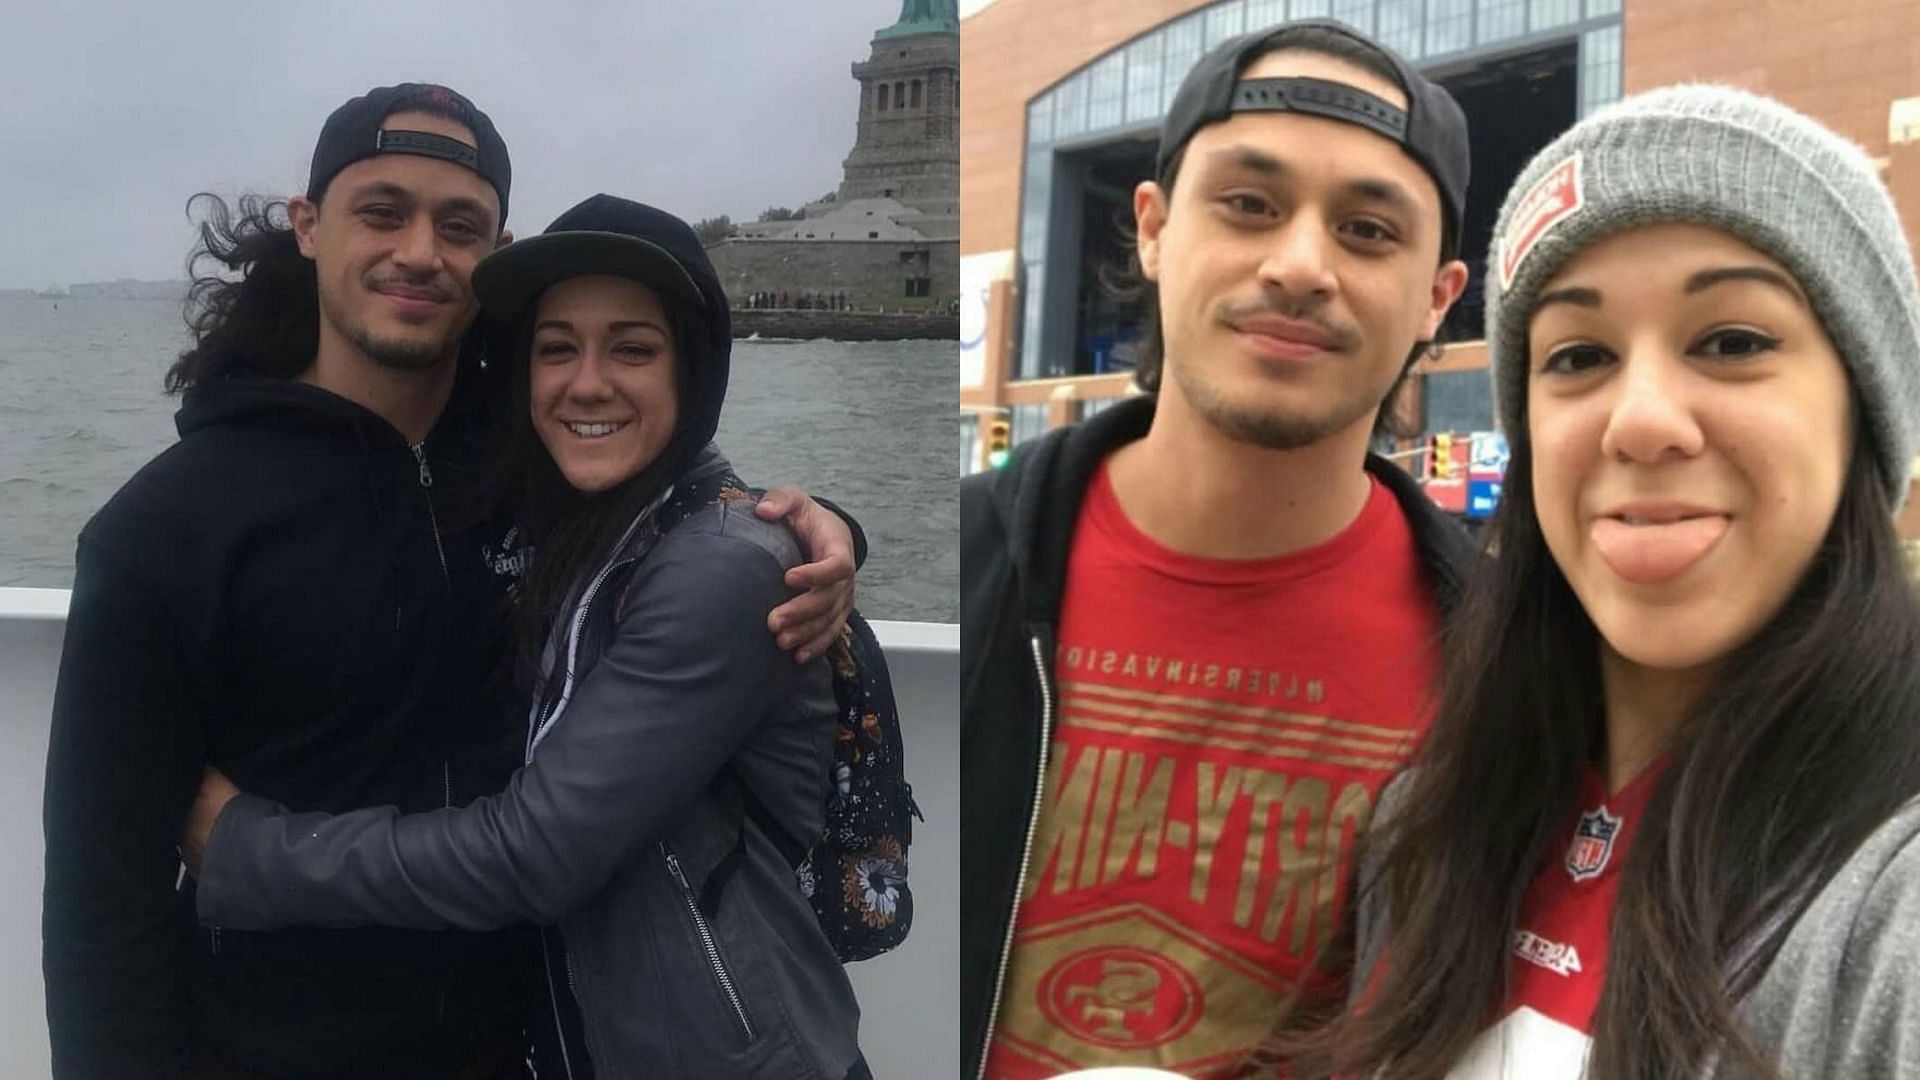 Bayley and Aaron Solow called off their engagement